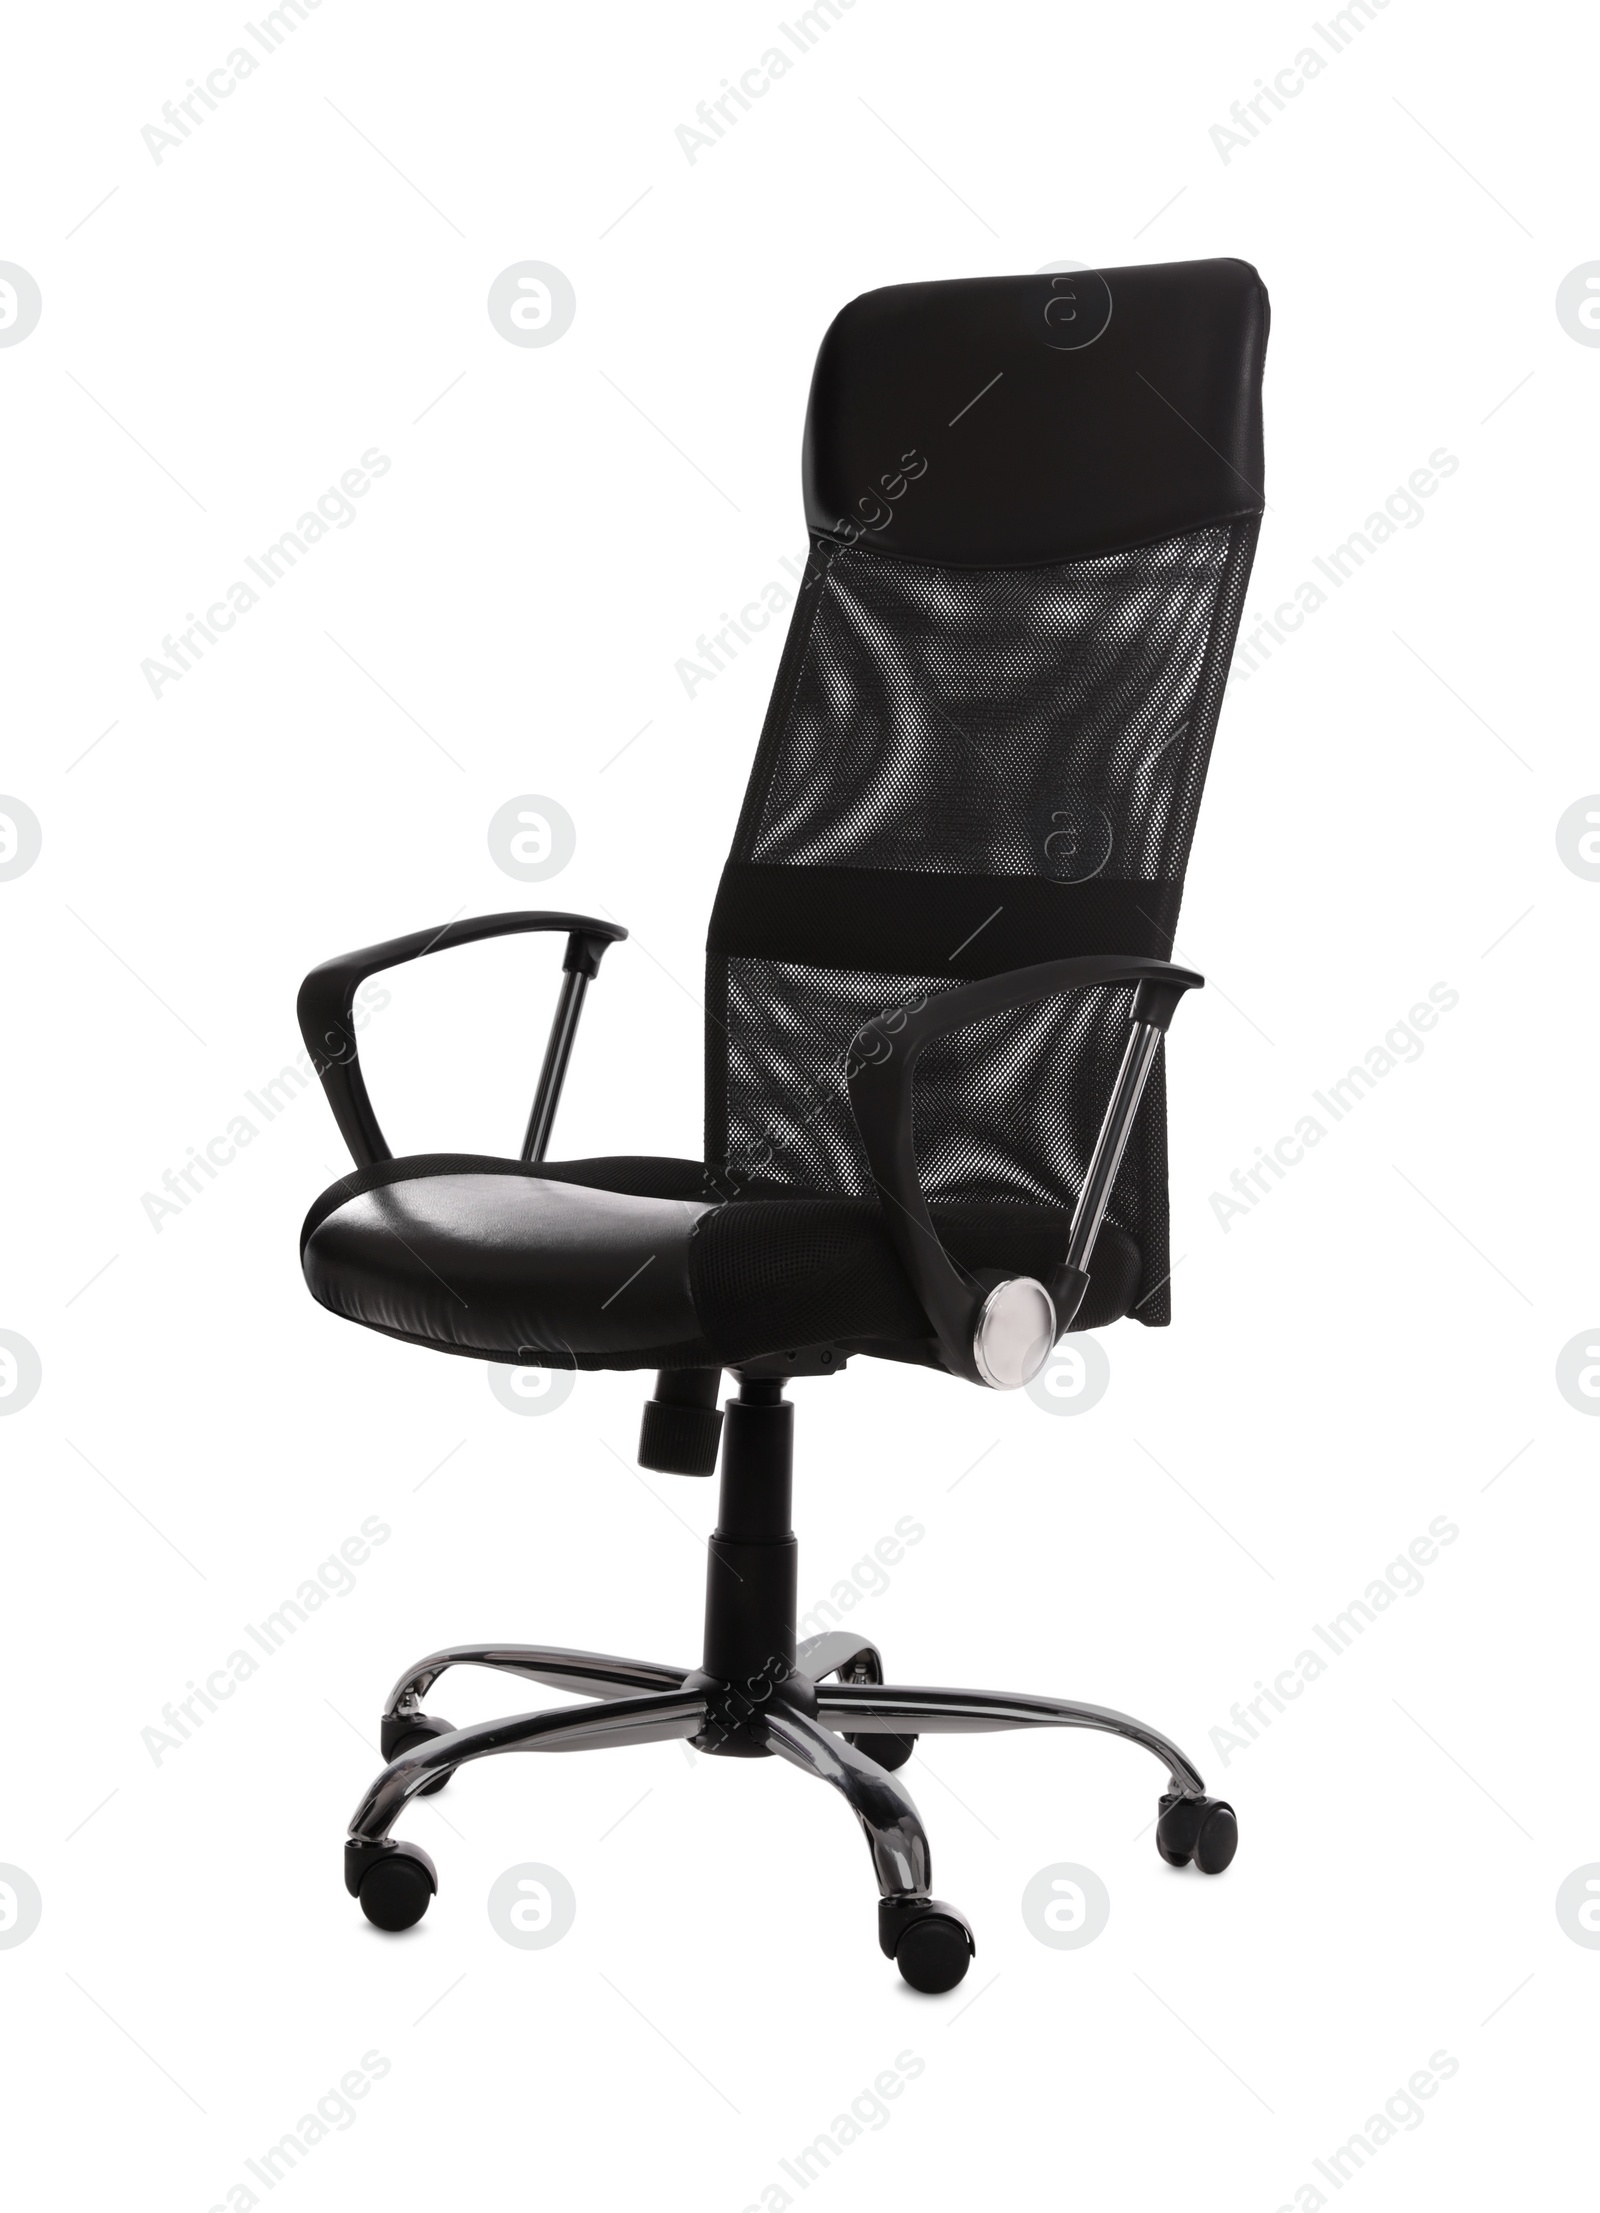 Photo of Comfortable office chair with leather seat isolated on white